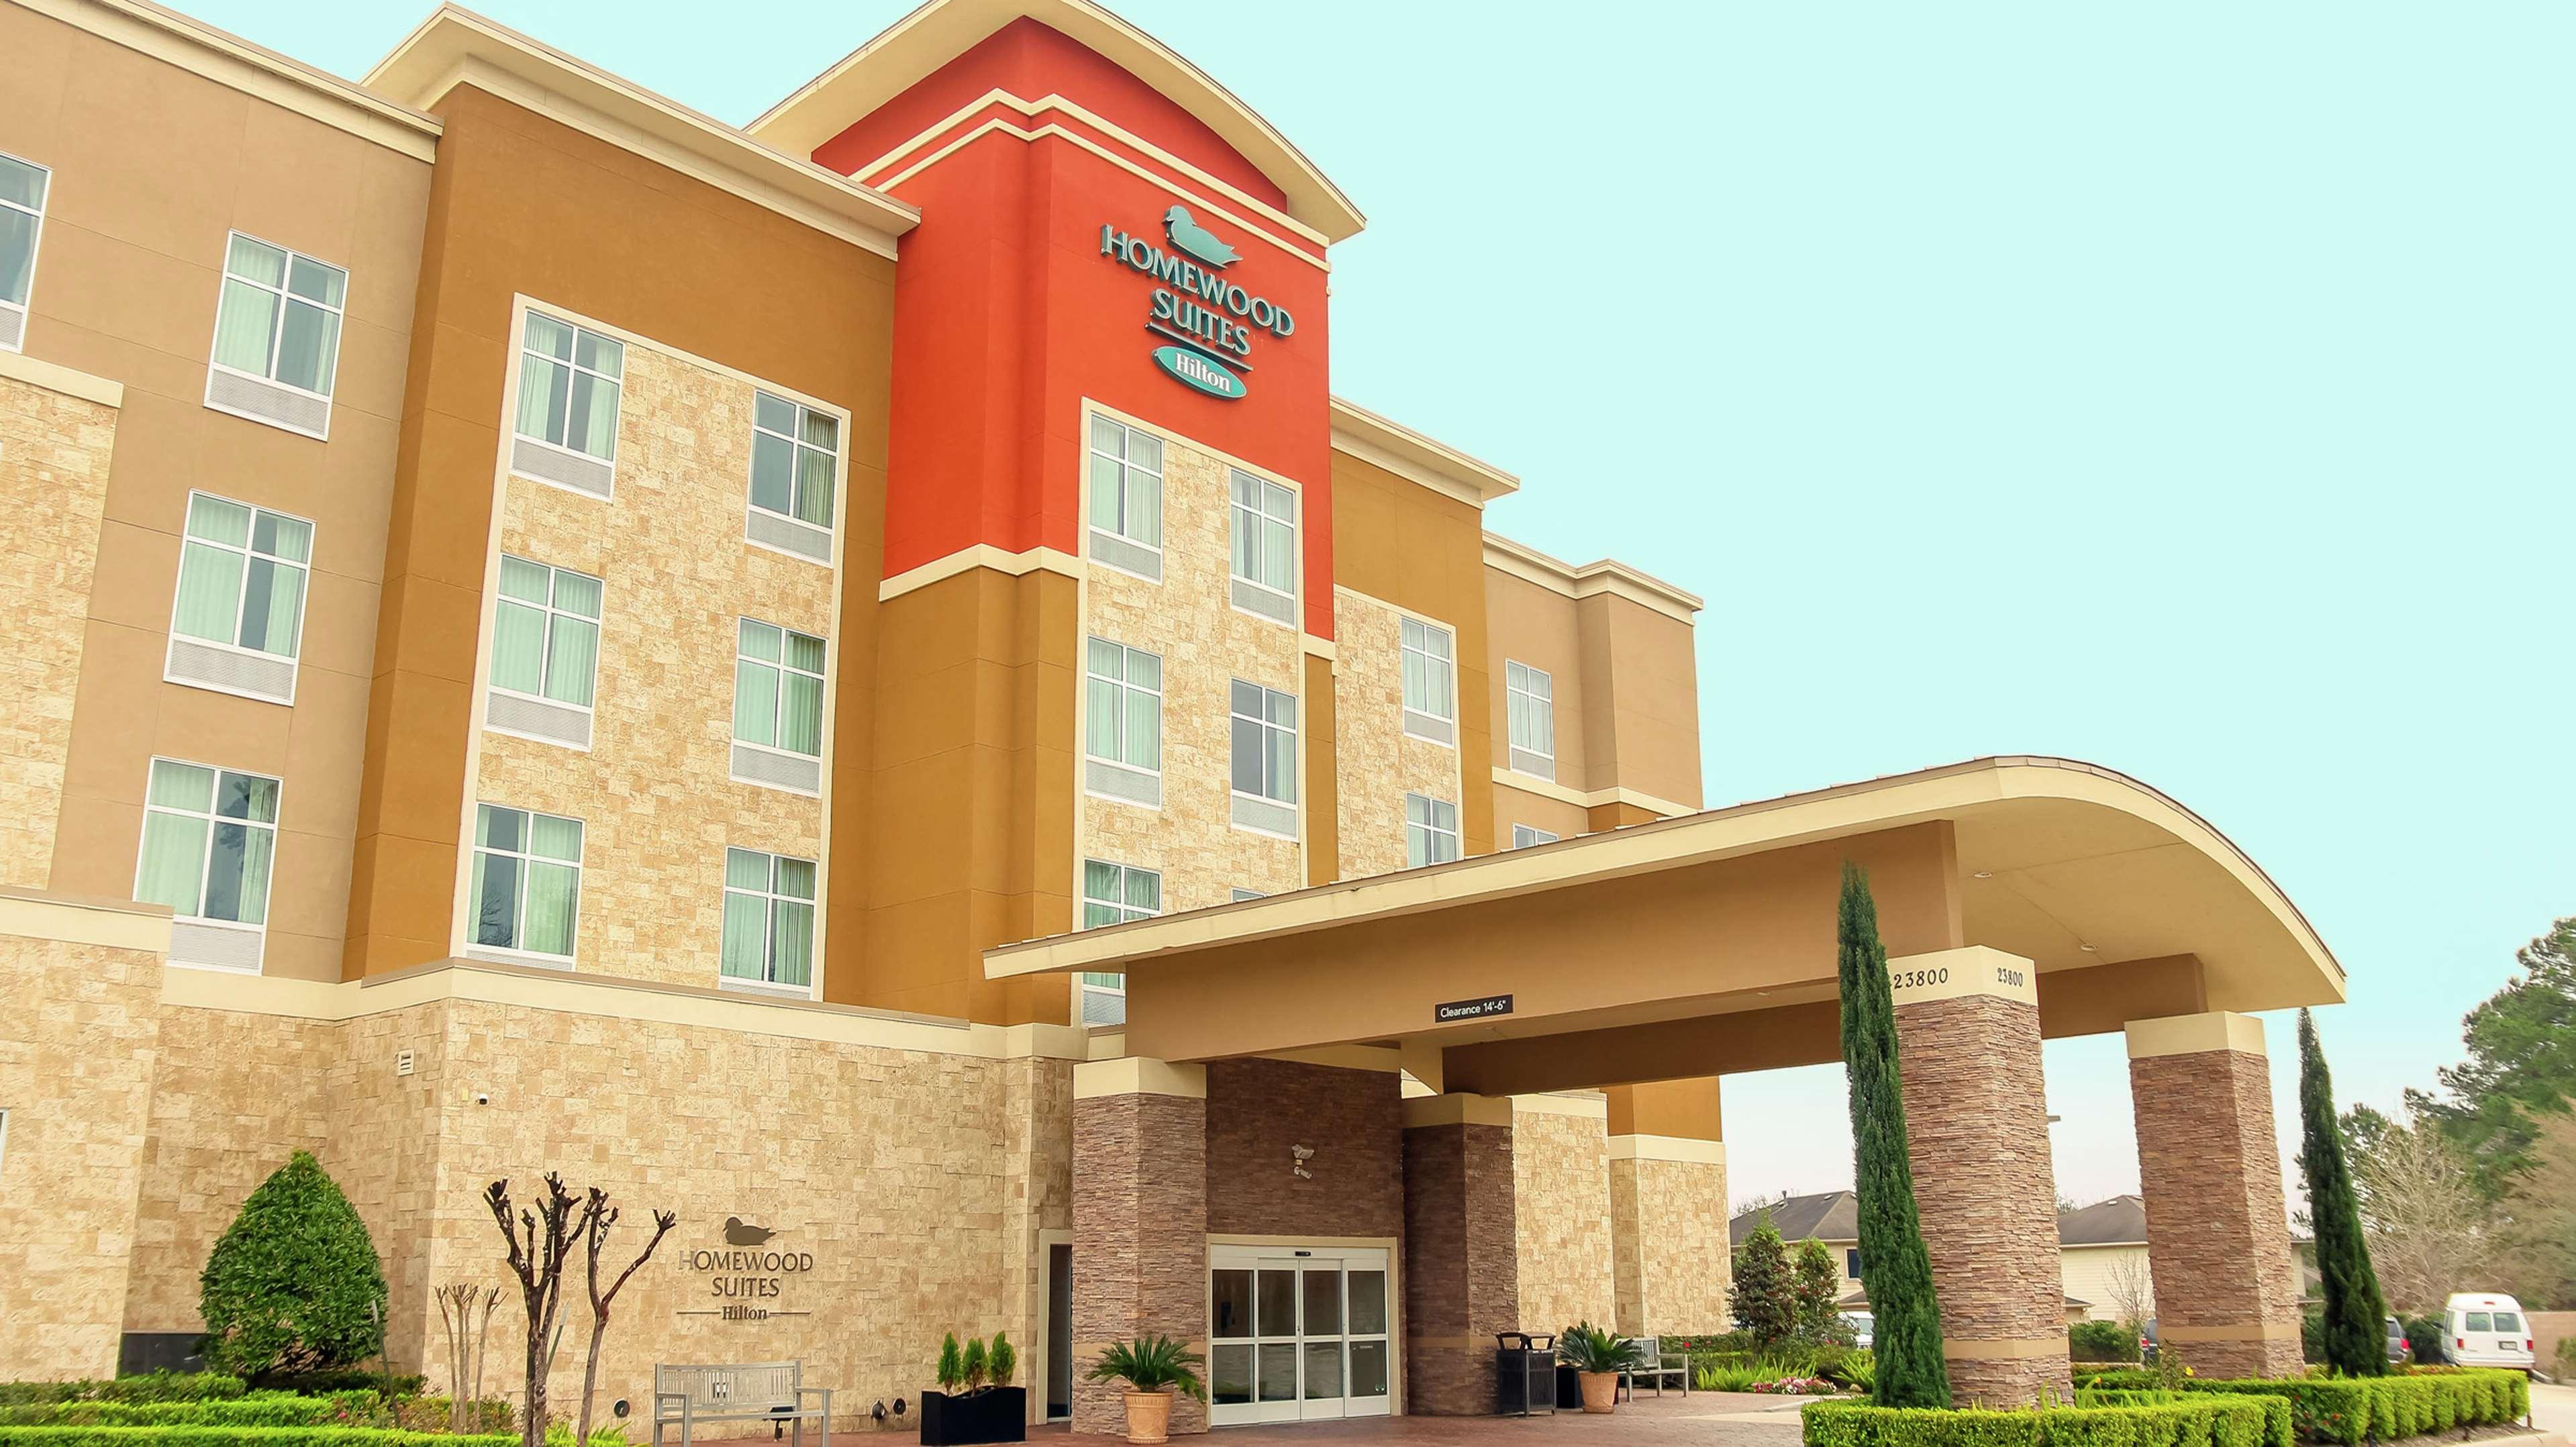 Homewood Suites by Hilton North Houston/Spring image